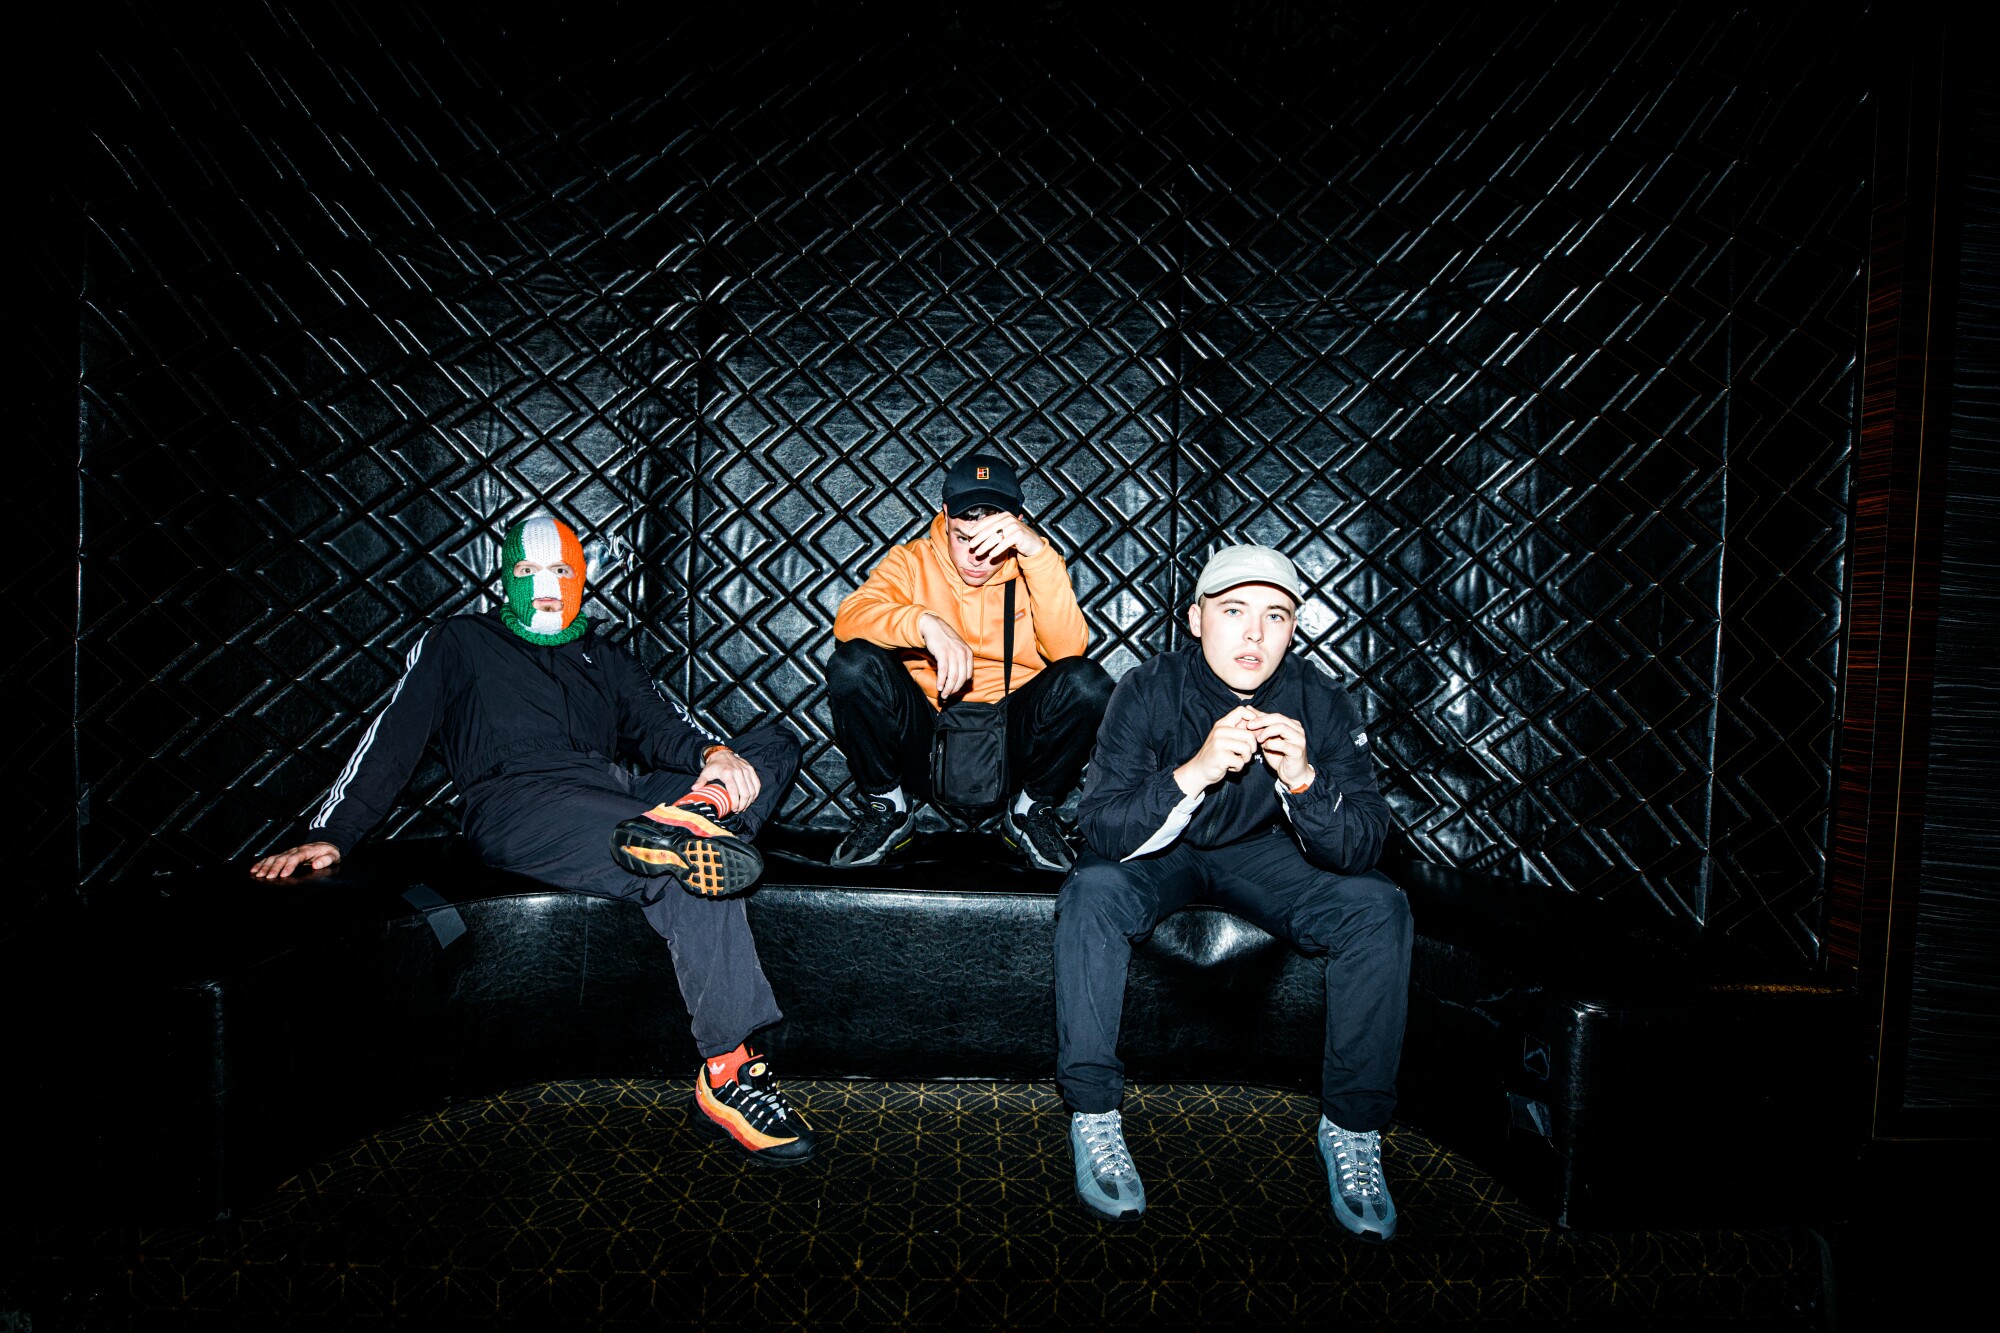 Three men sit in front of a black wall with a diamond pattern.